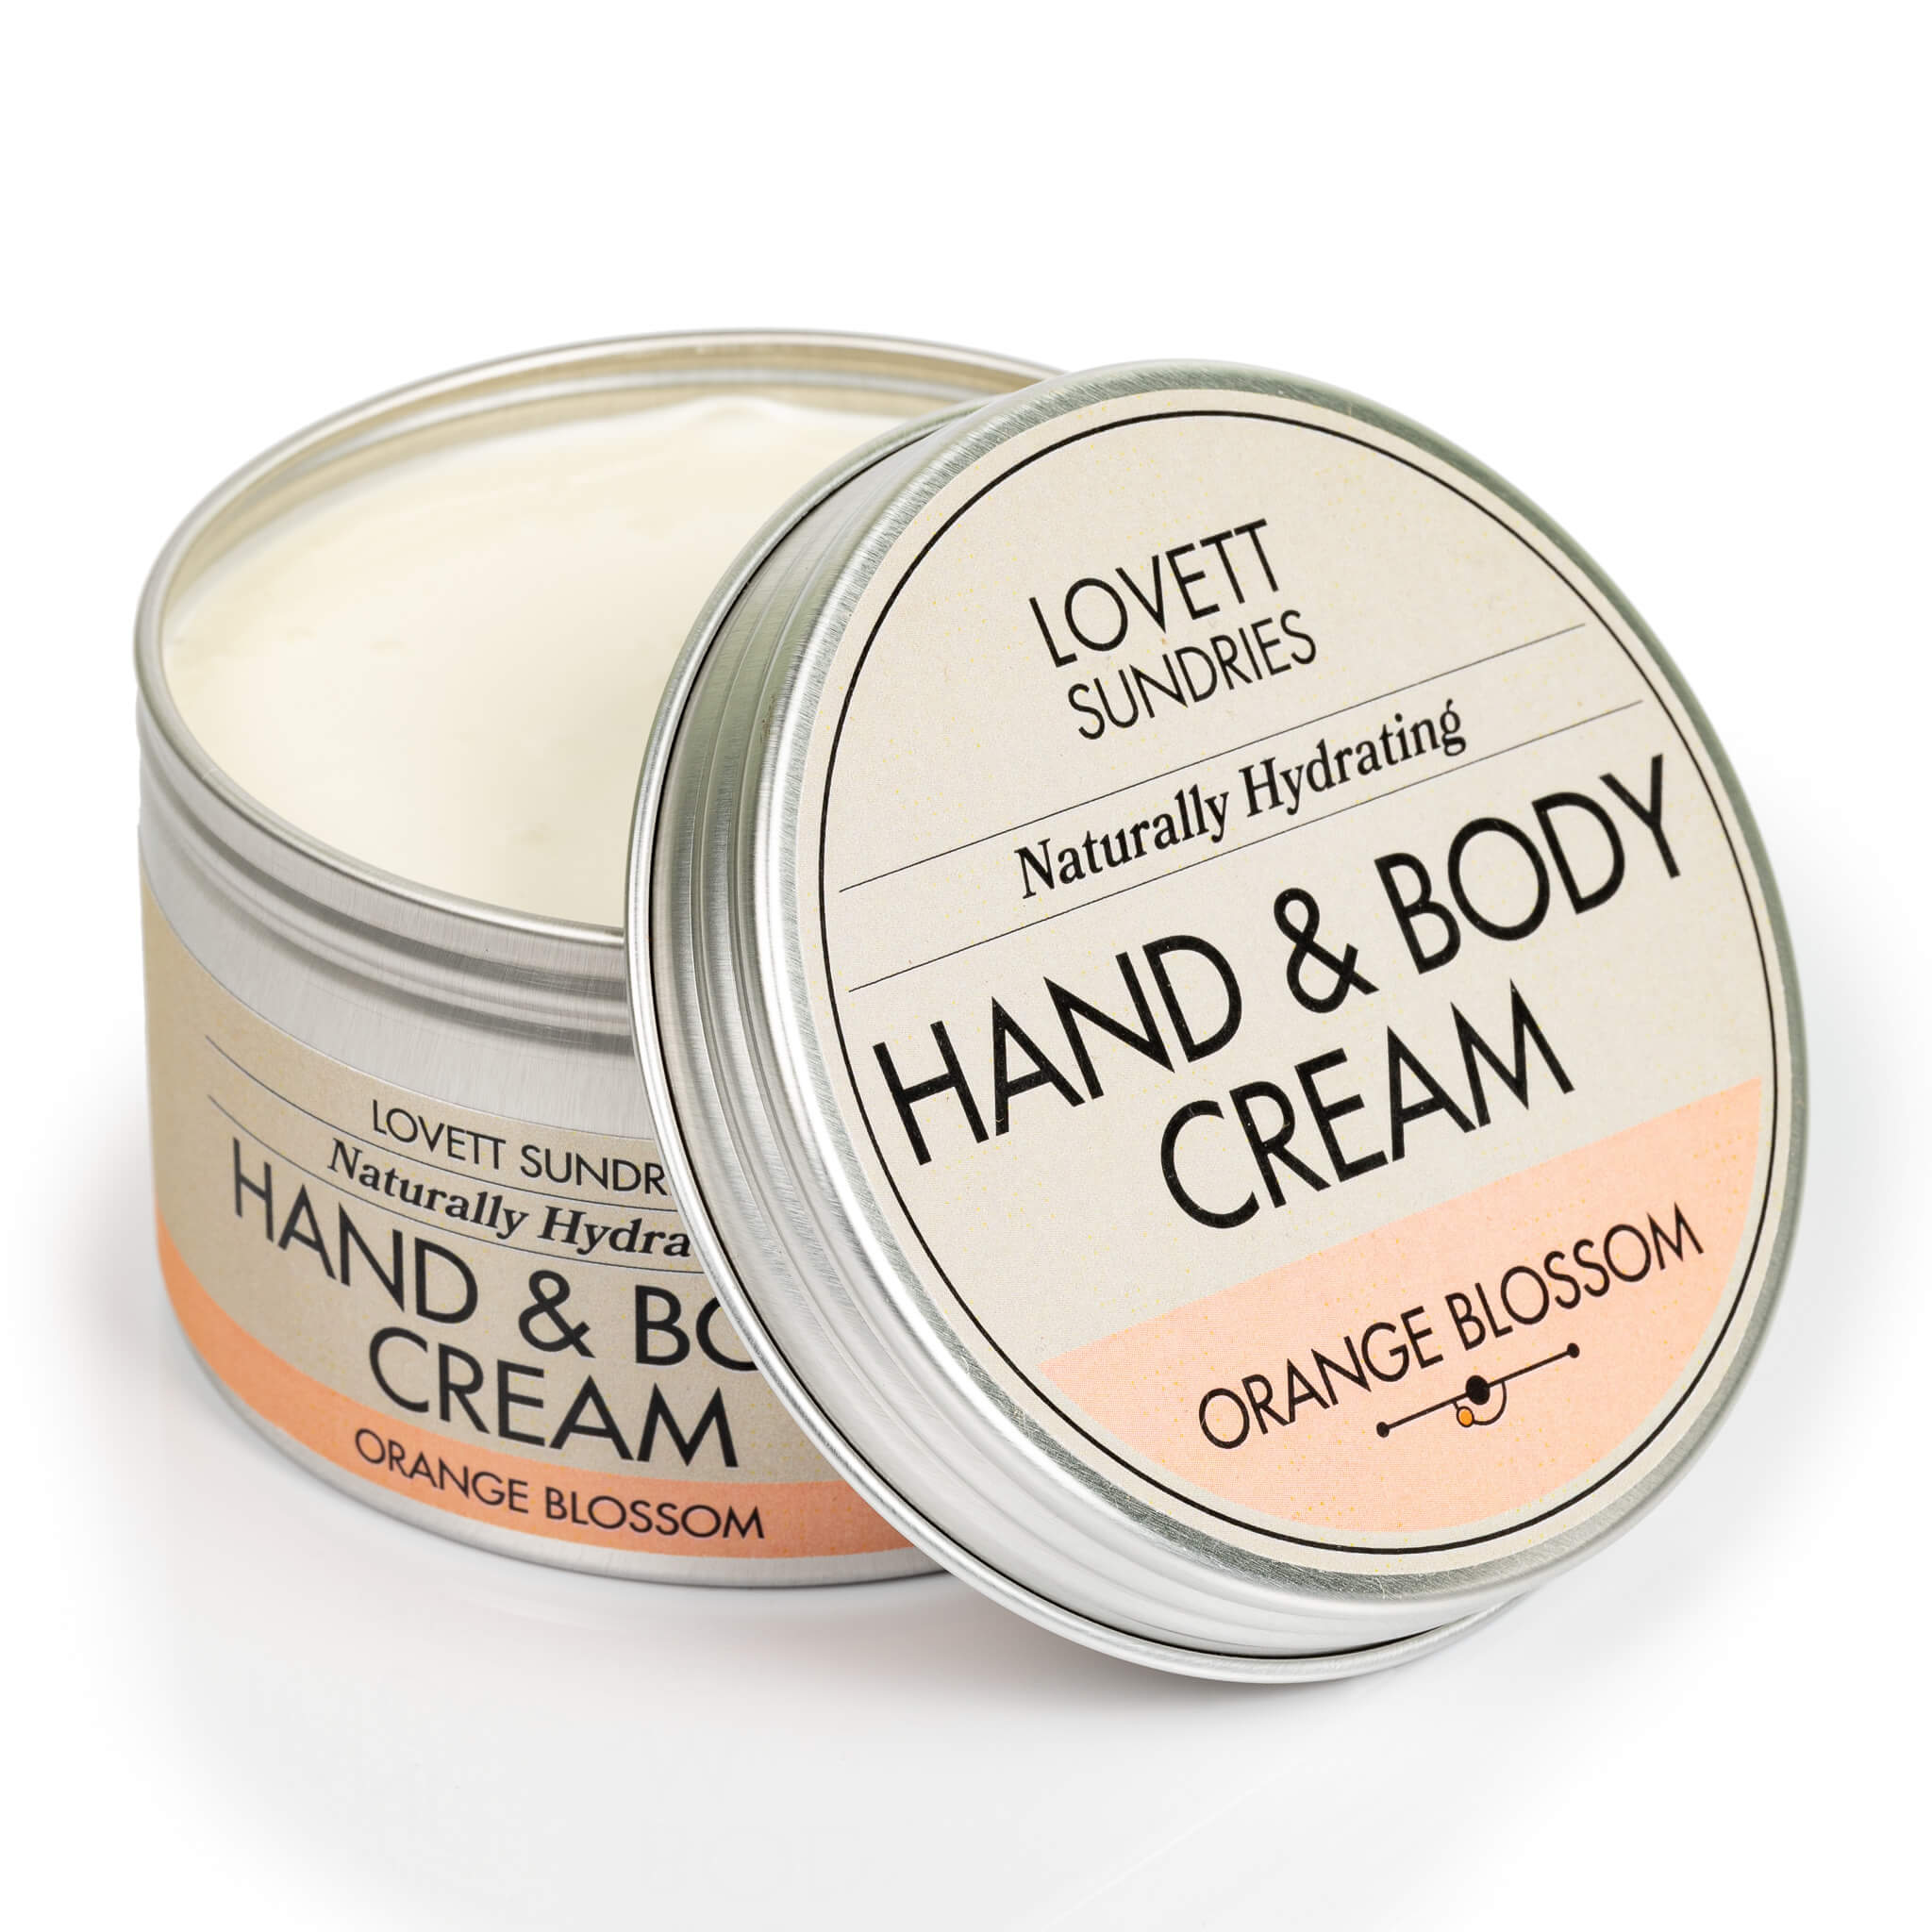 Open tin of creamy all natural hydrating orange blossom scented hand and body cream. 